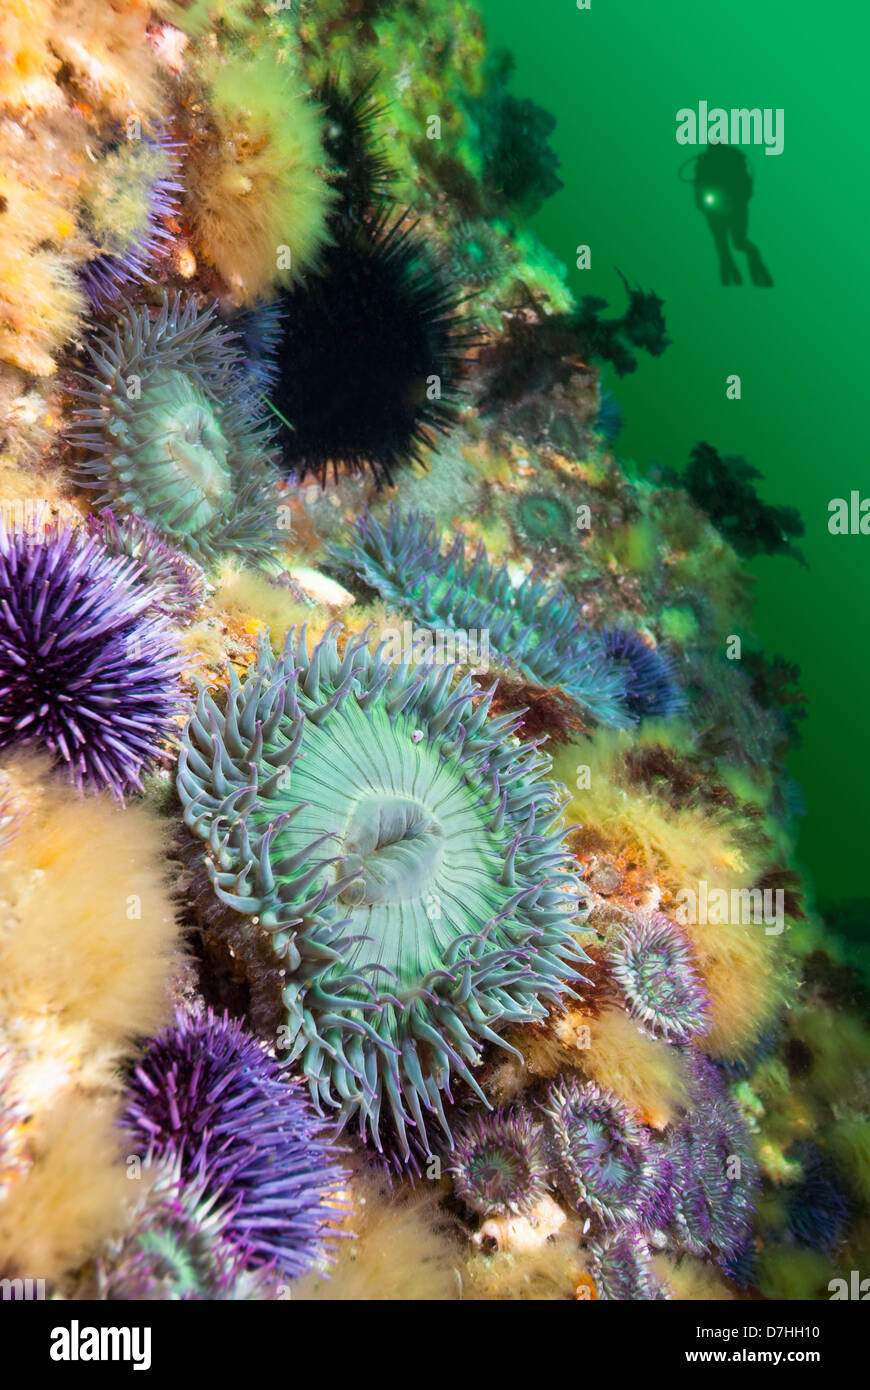 A scuba diver hoovers near a colorful reef covered with sea anemones and sea urchins. Stock Photo